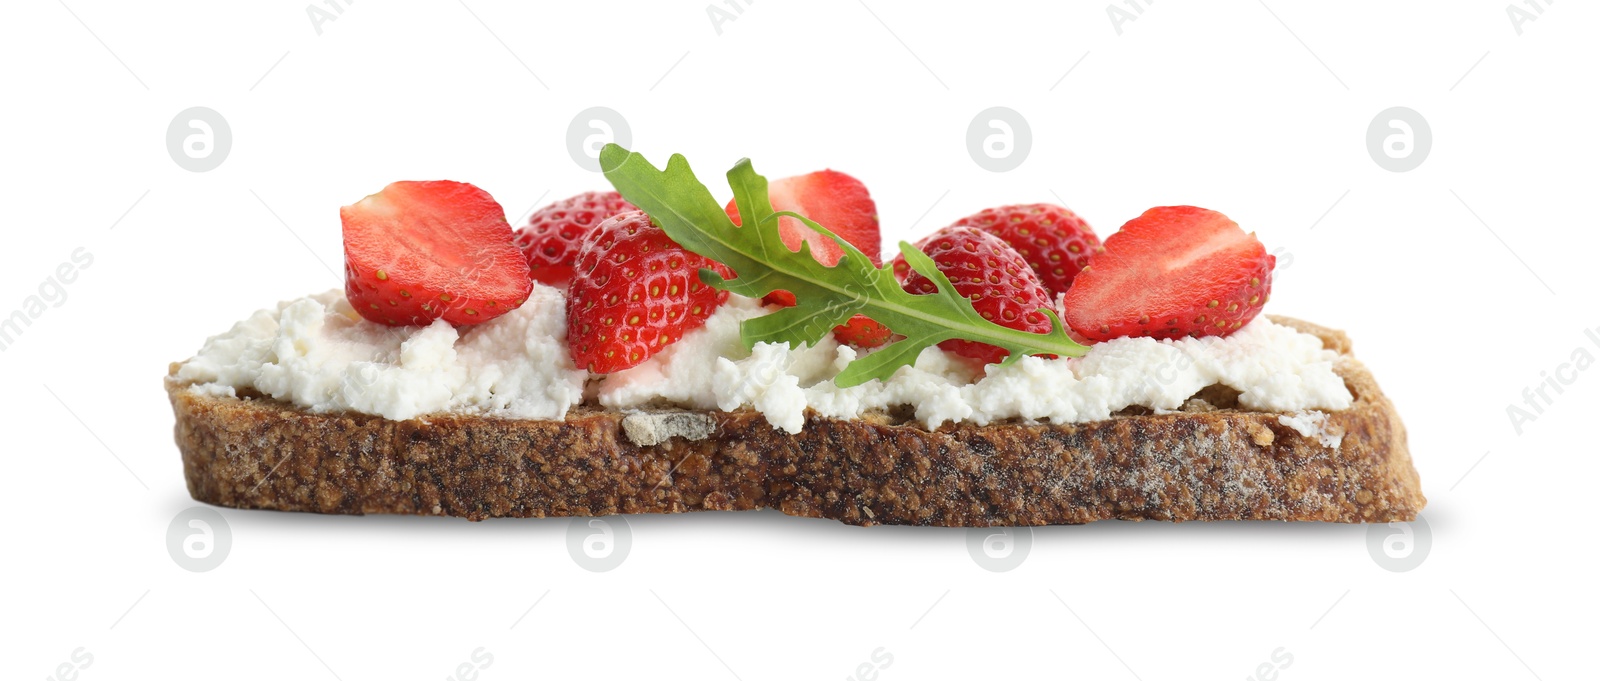 Photo of Delicious ricotta bruschetta with strawberry and arugula isolated on white